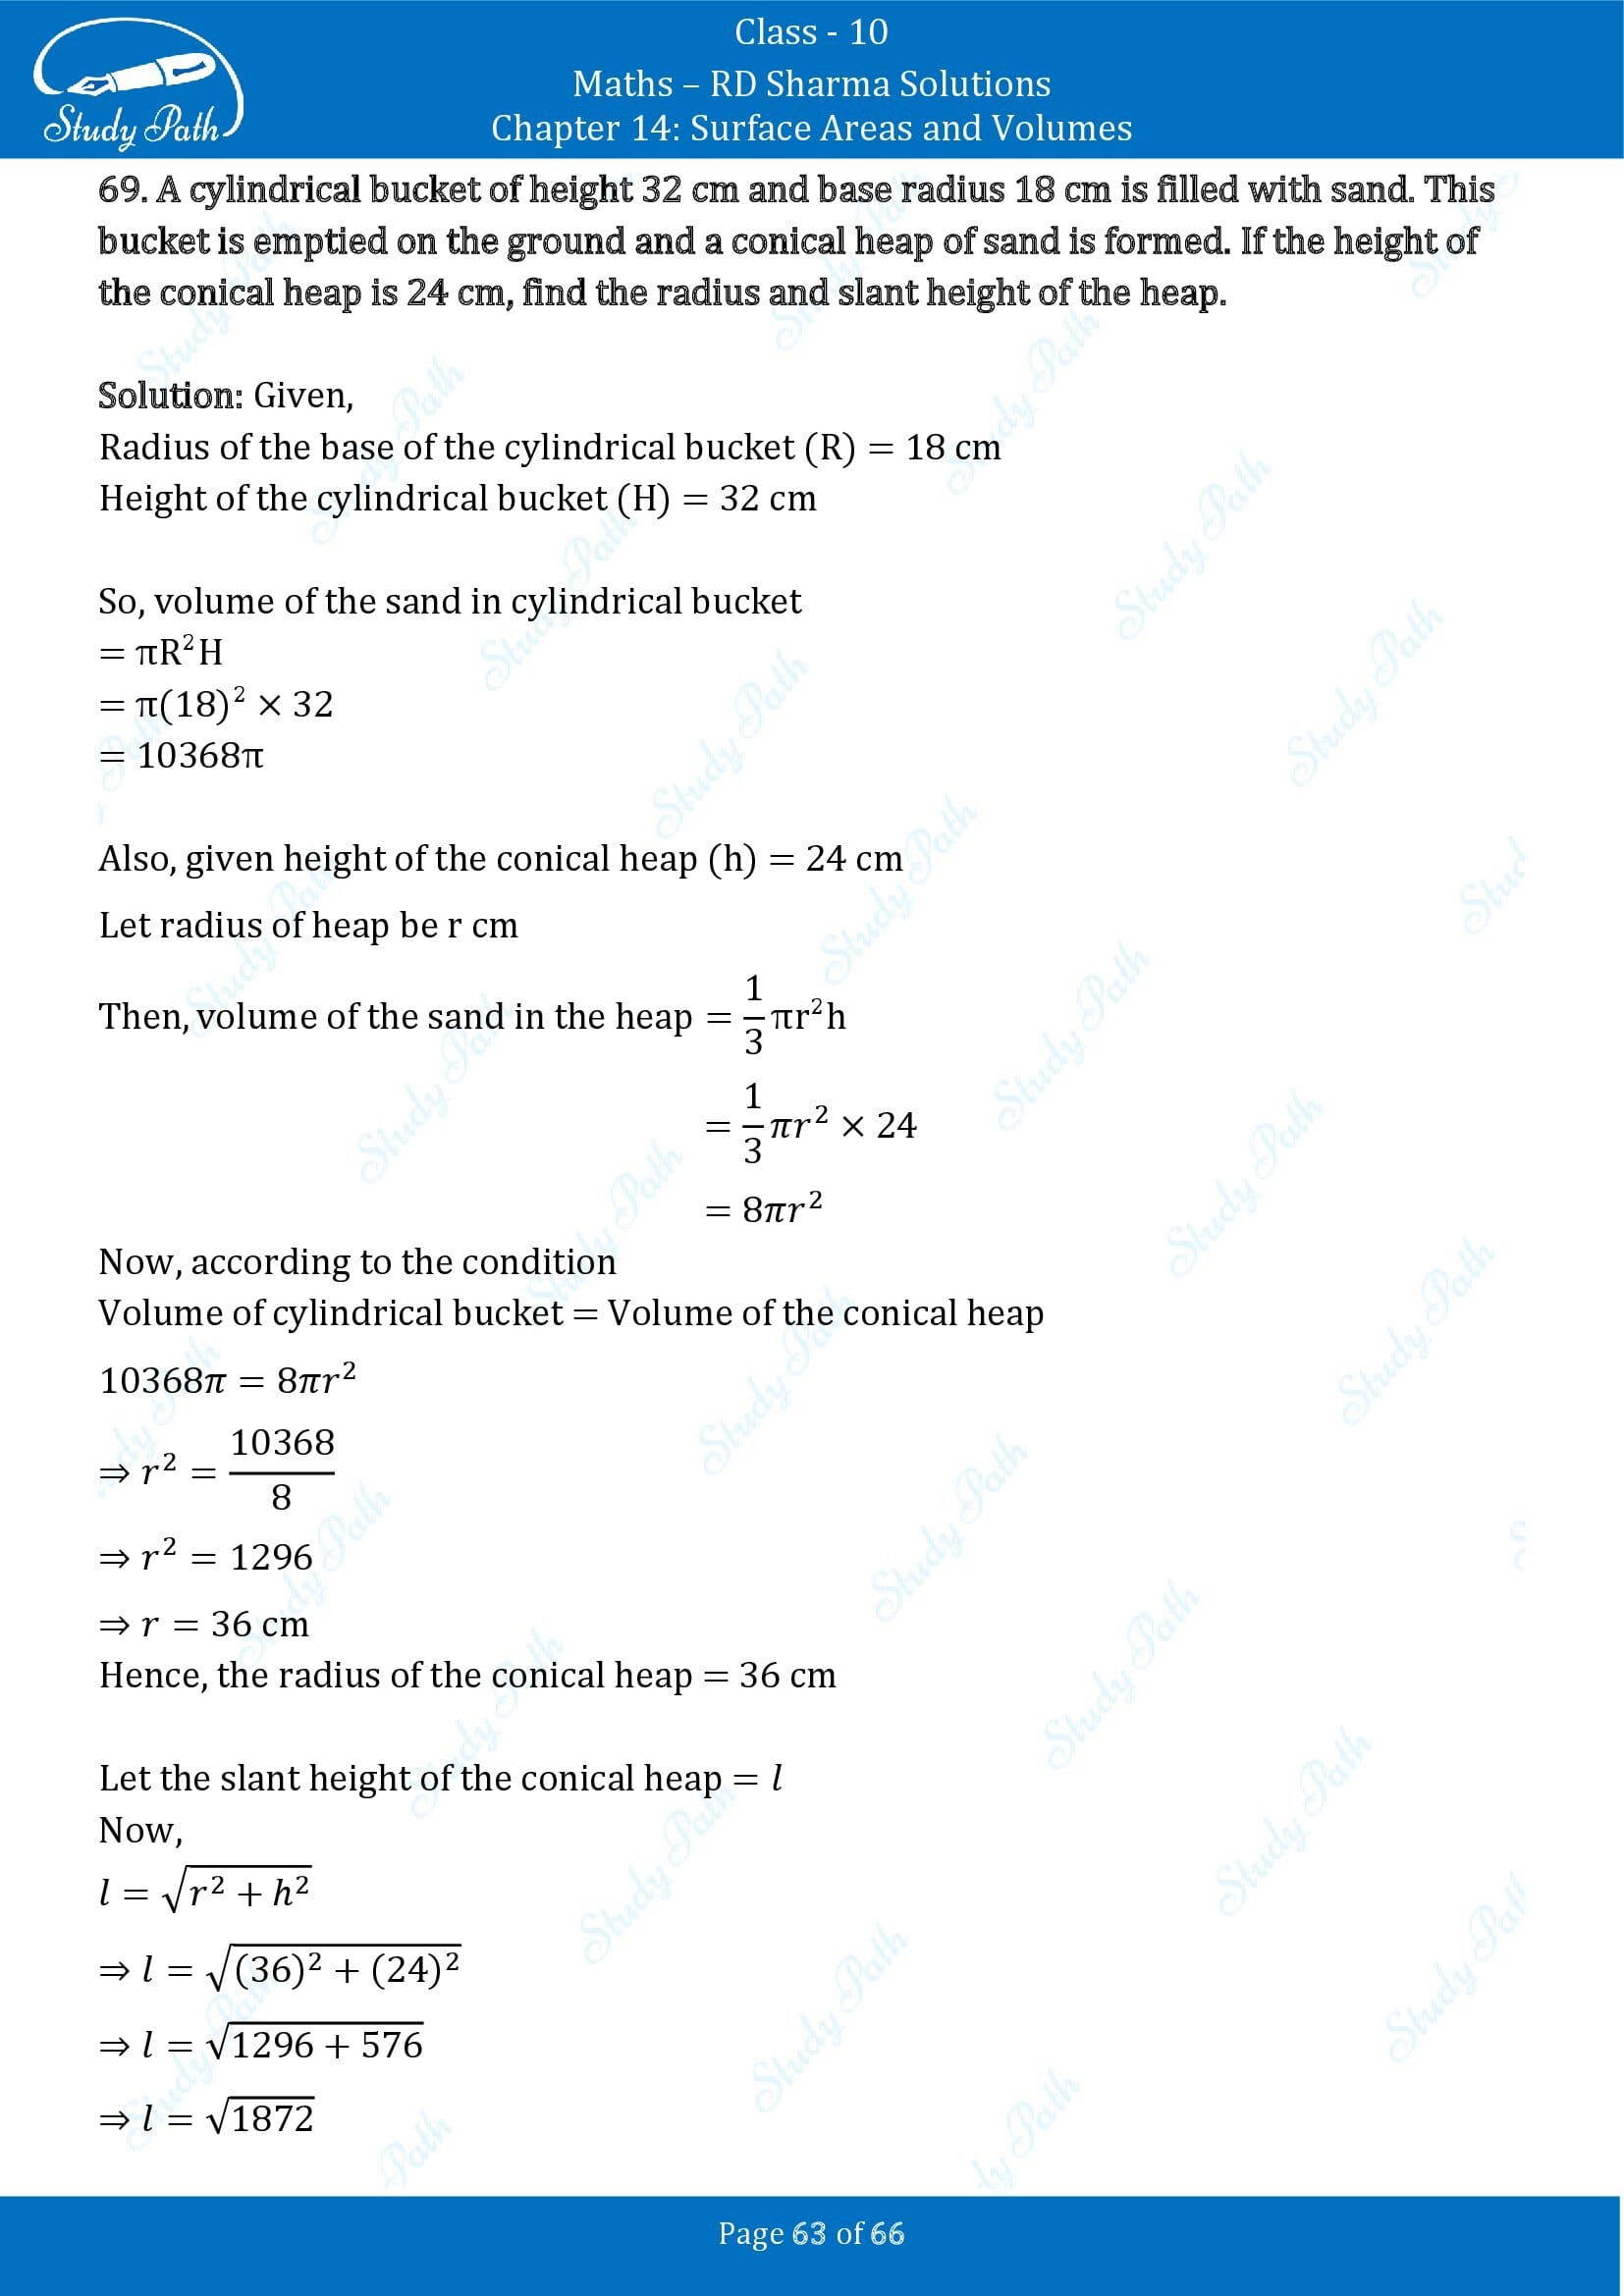 RD Sharma Solutions Class 10 Chapter 14 Surface Areas and Volumes Exercise 14.1 00063